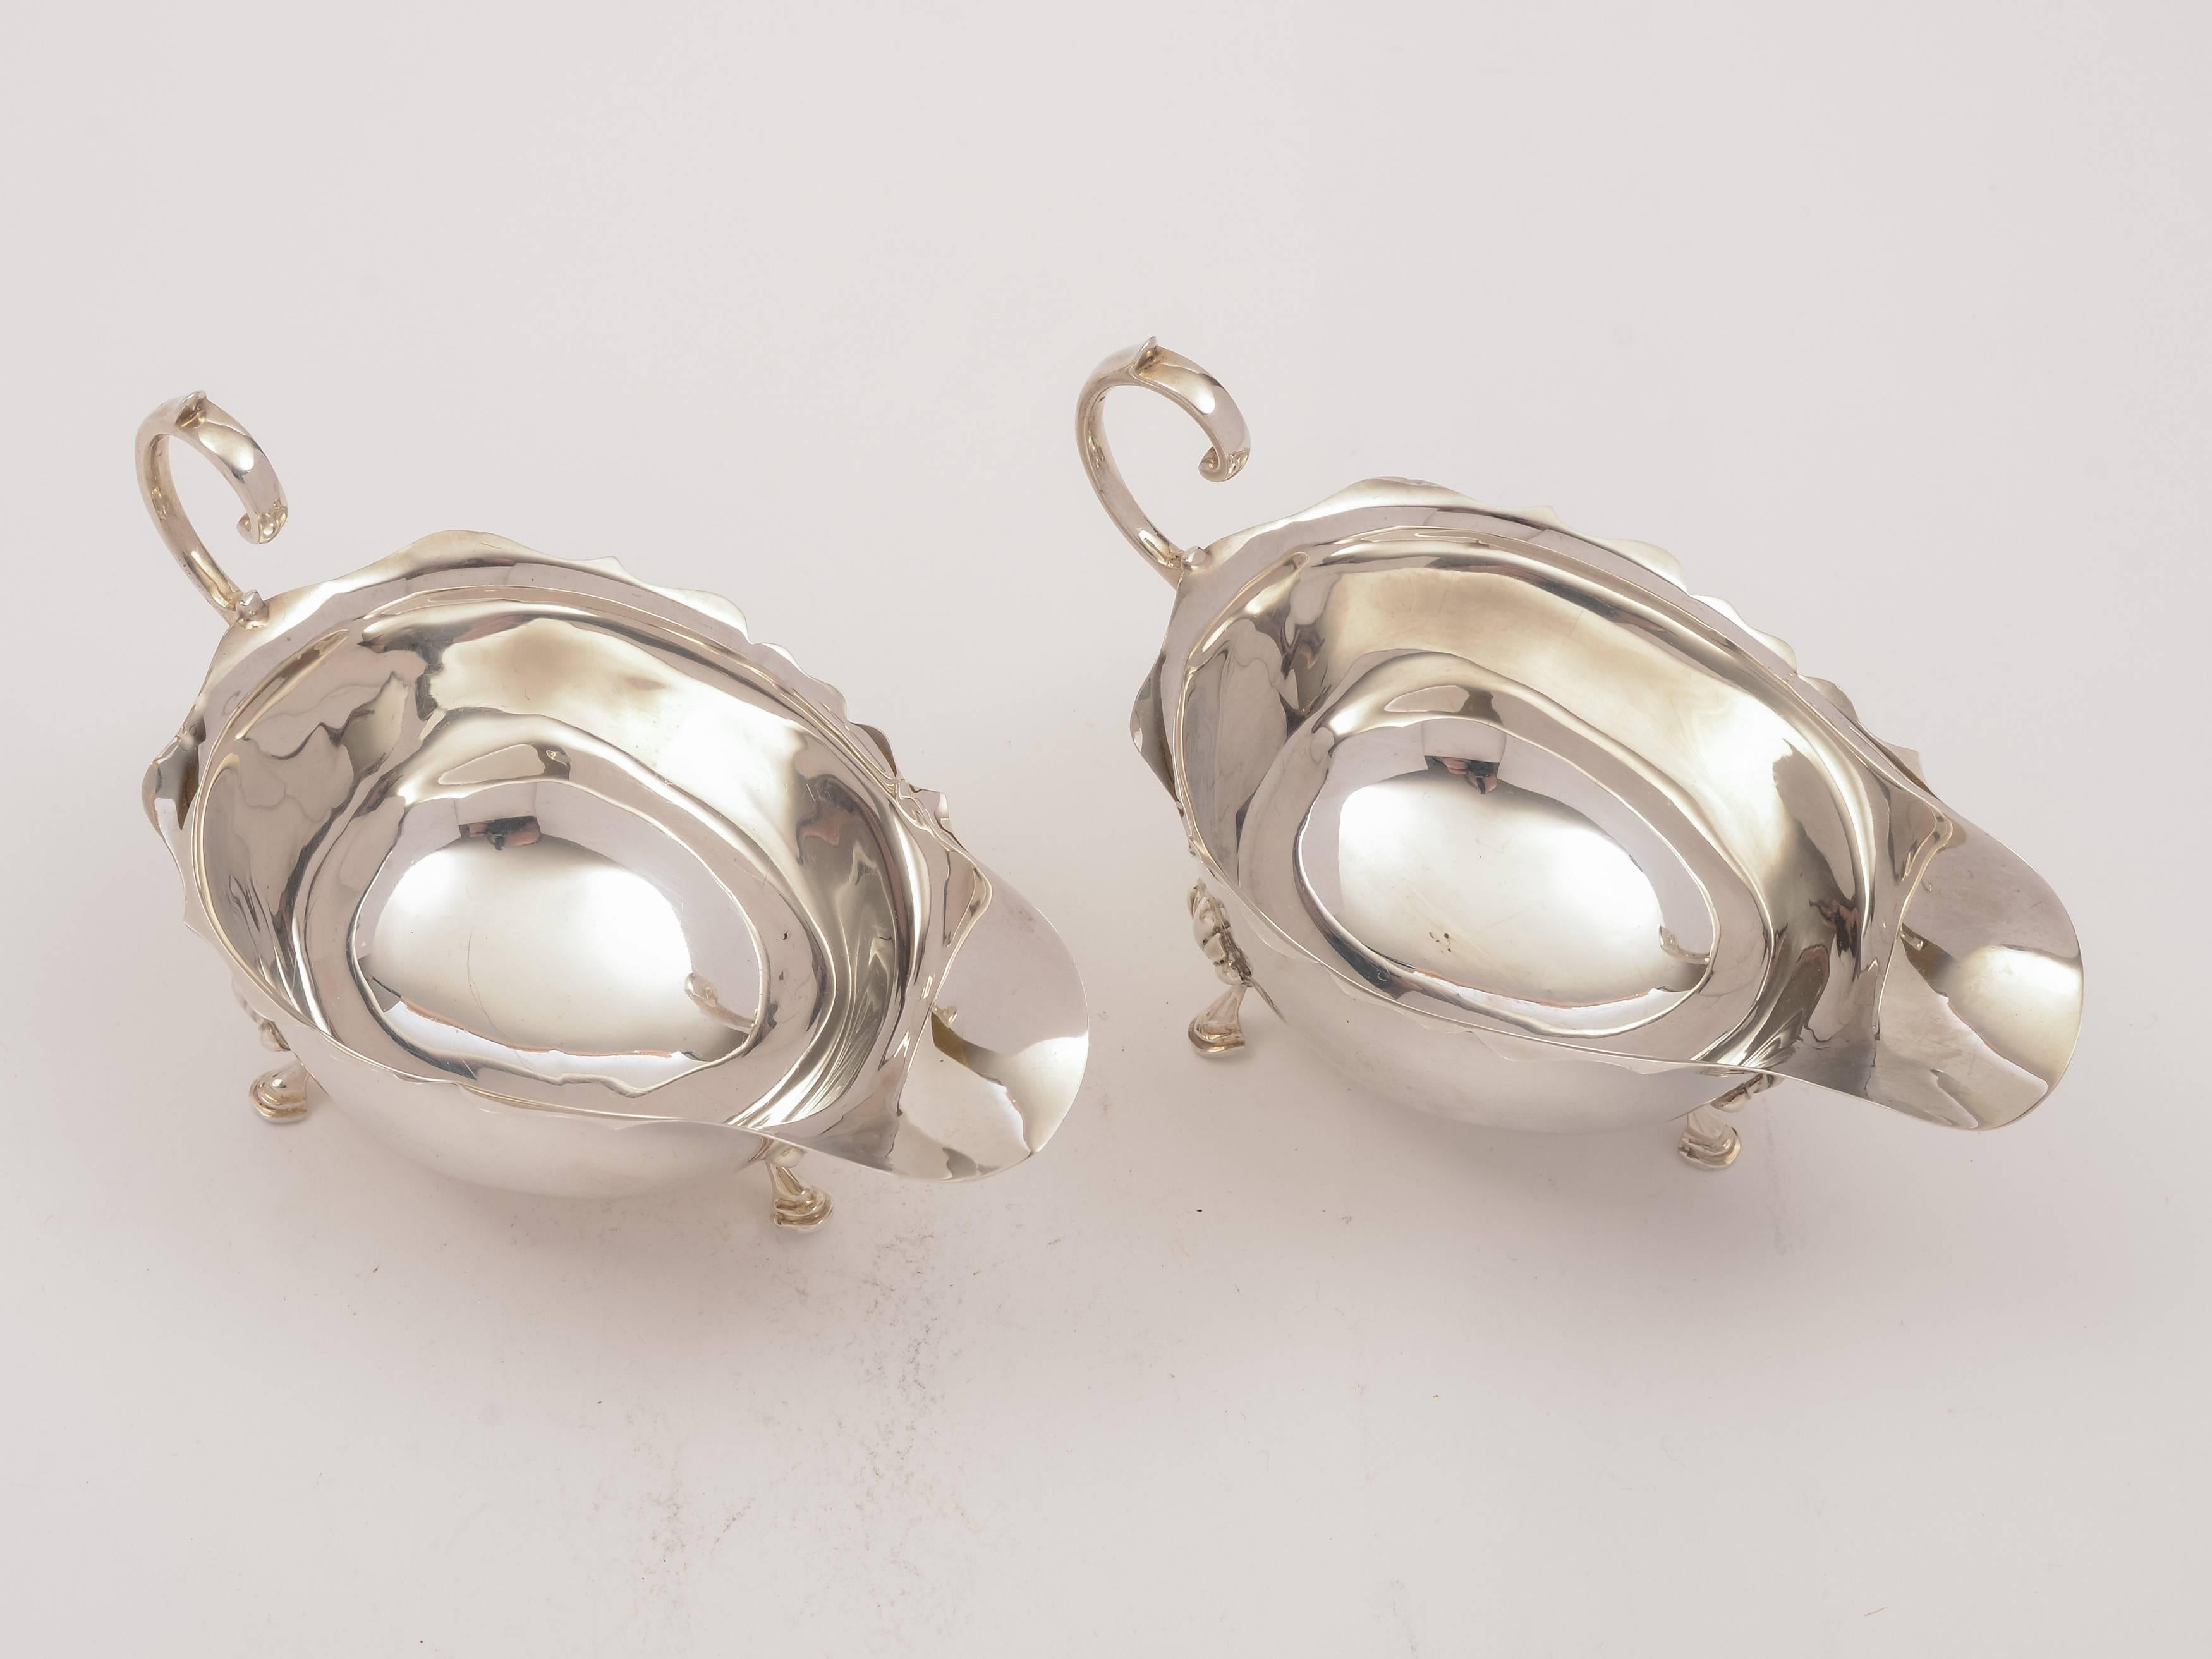 Great Britain (UK) Pair of 20th Century Art Deco Silver Sauce Boats, Sheffield, 1929